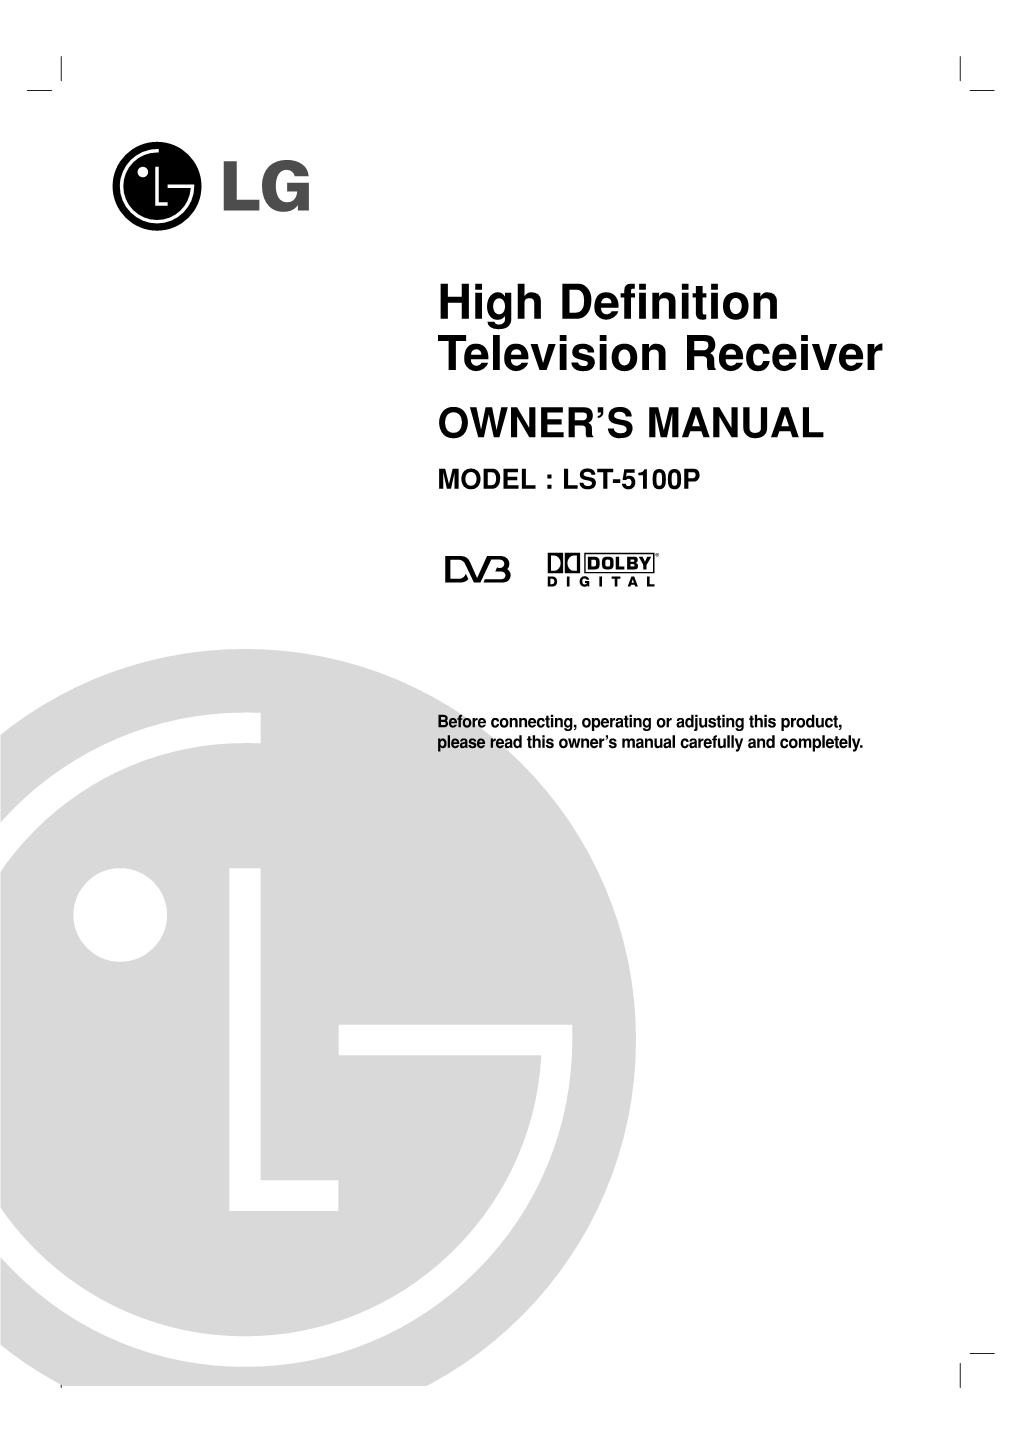 High Definition Television Receiver OWNER’S MANUAL MODEL : LST-5100P